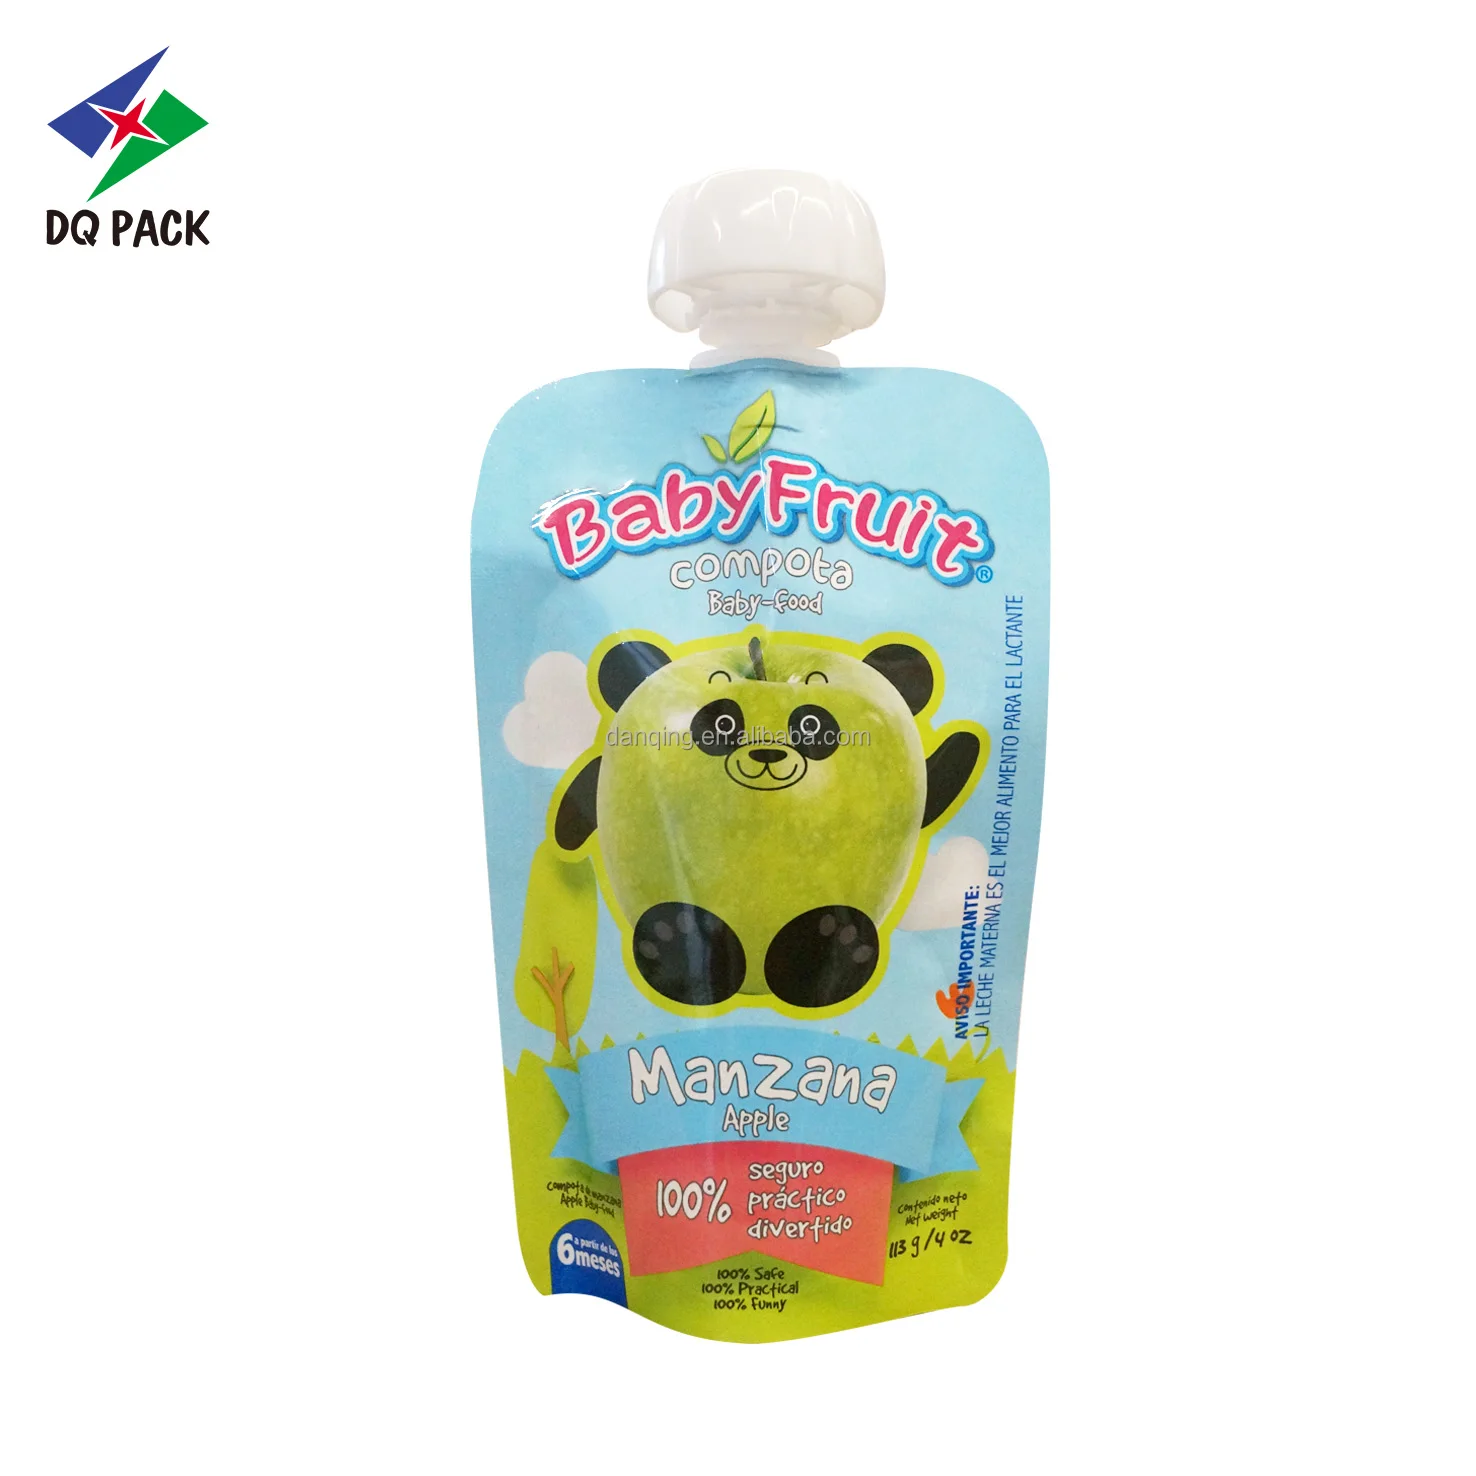 DQ PACK Custom Printing Recyclable Laminated Material Baby Food Spout Pouch